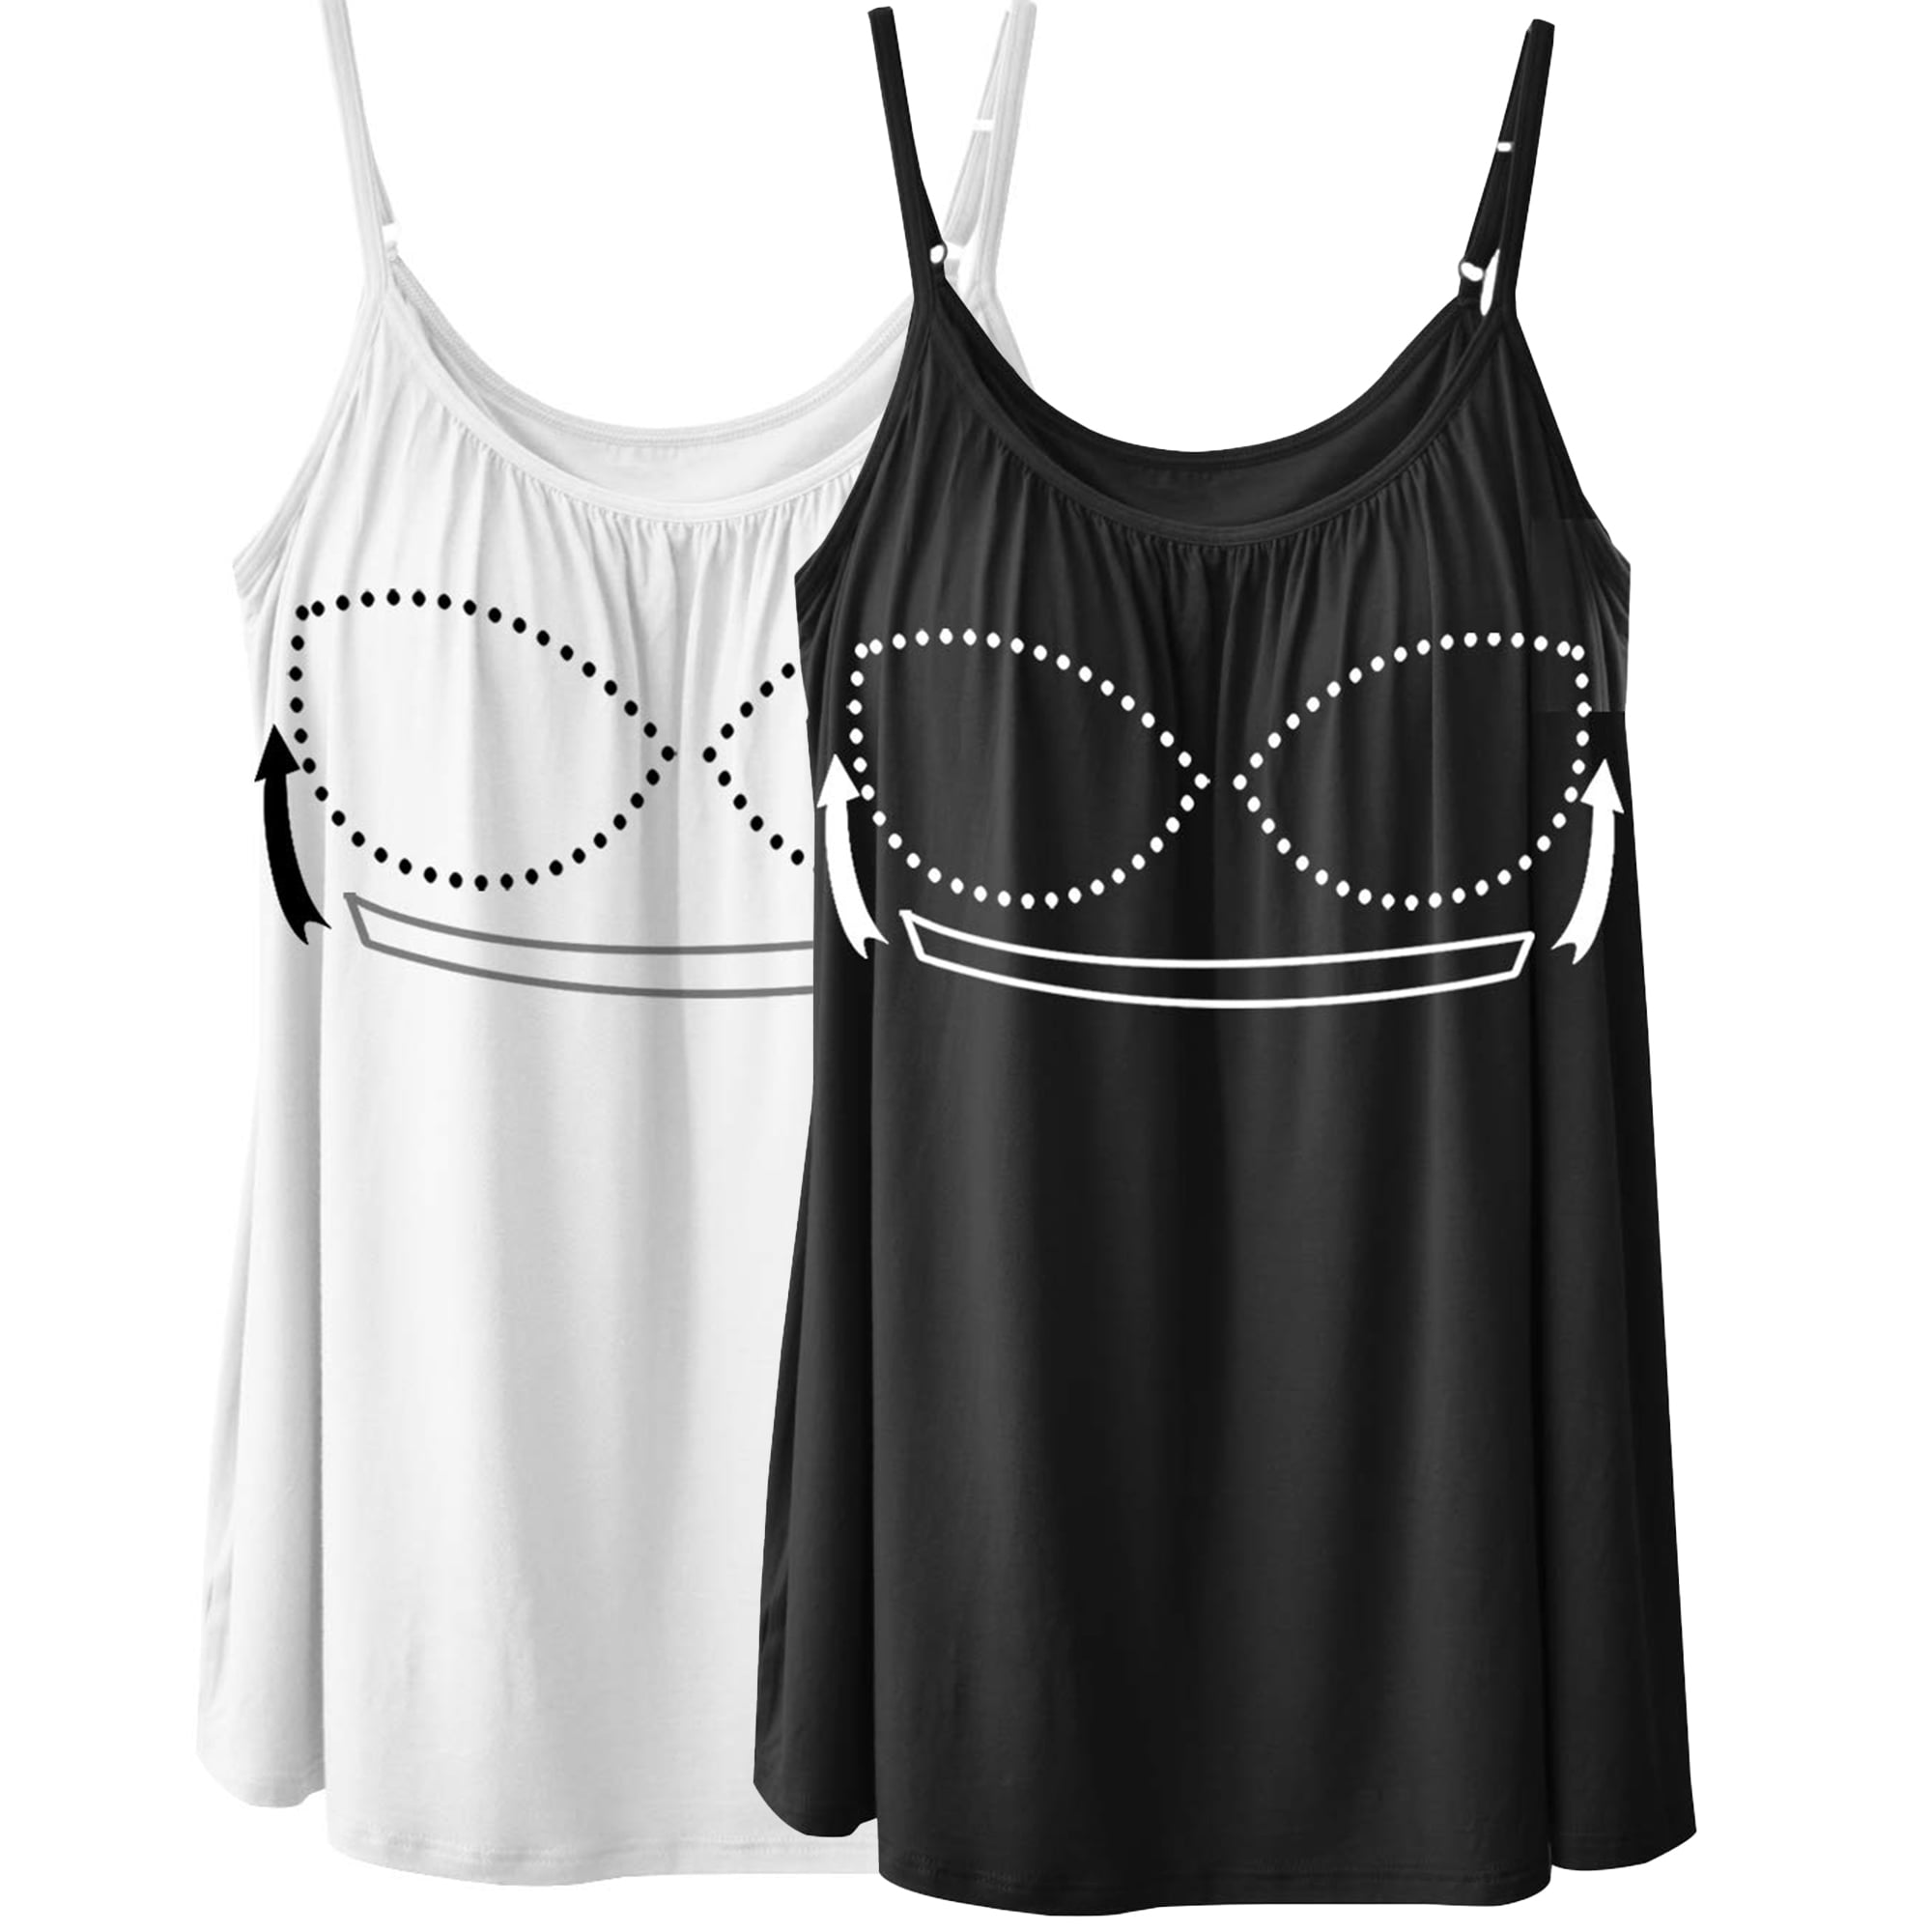 CARCOS Womens Camisoles with Built in Bras Plus Size Summer Tank Top  Adjustable Spaghetti Strap Flowy Sleeveless Camis Black-White,Medium 